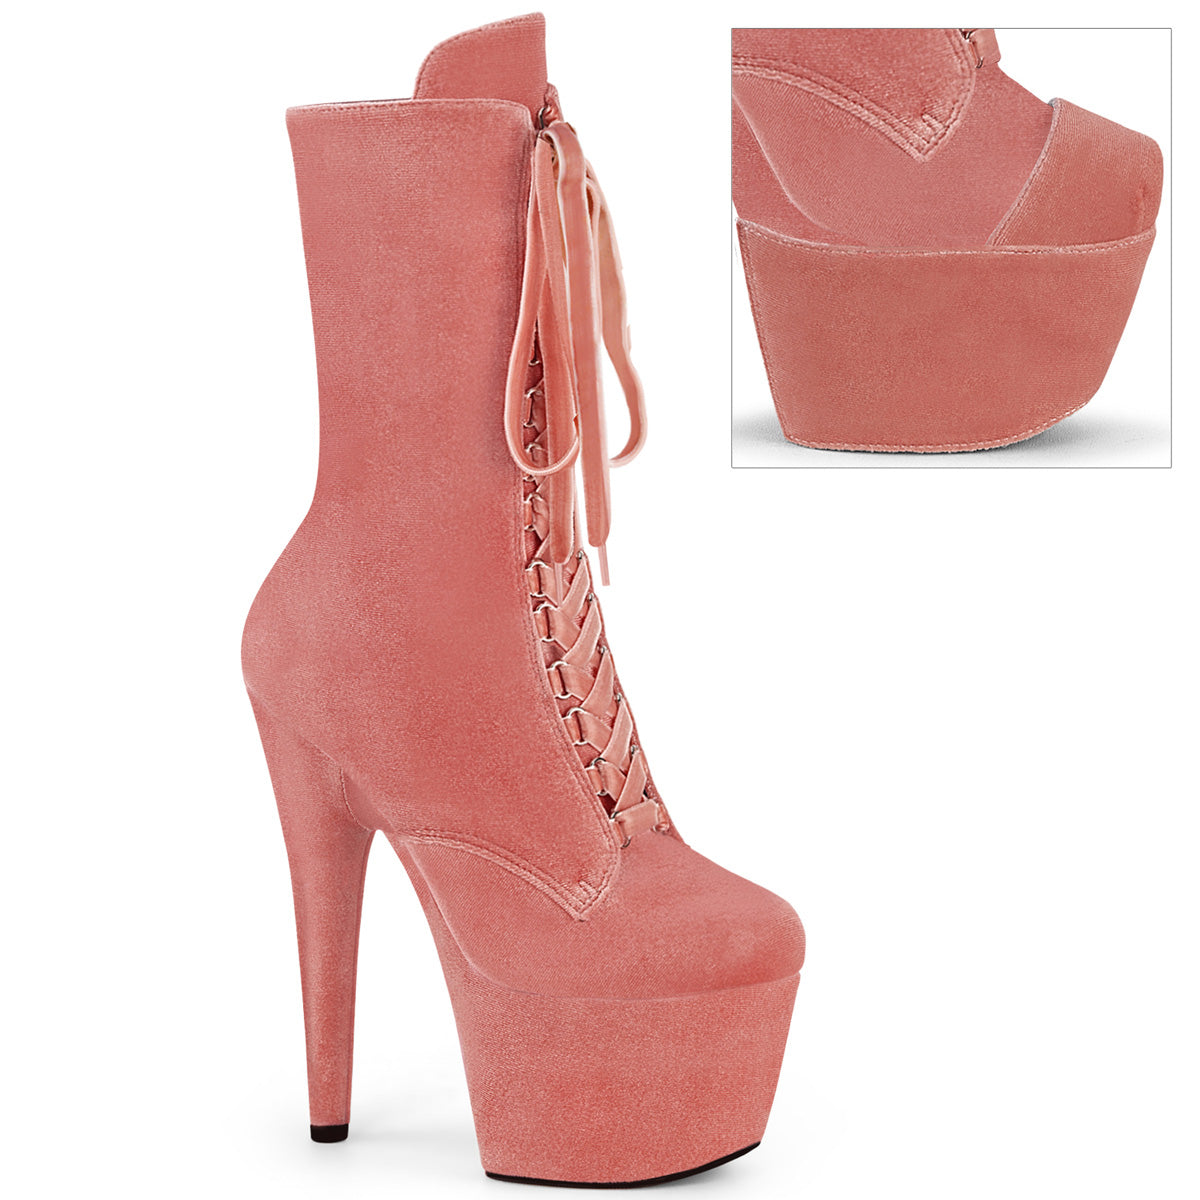 ADORE-1045VEL Velvet Lace-Up Ankle Boot Pink Multi view 1